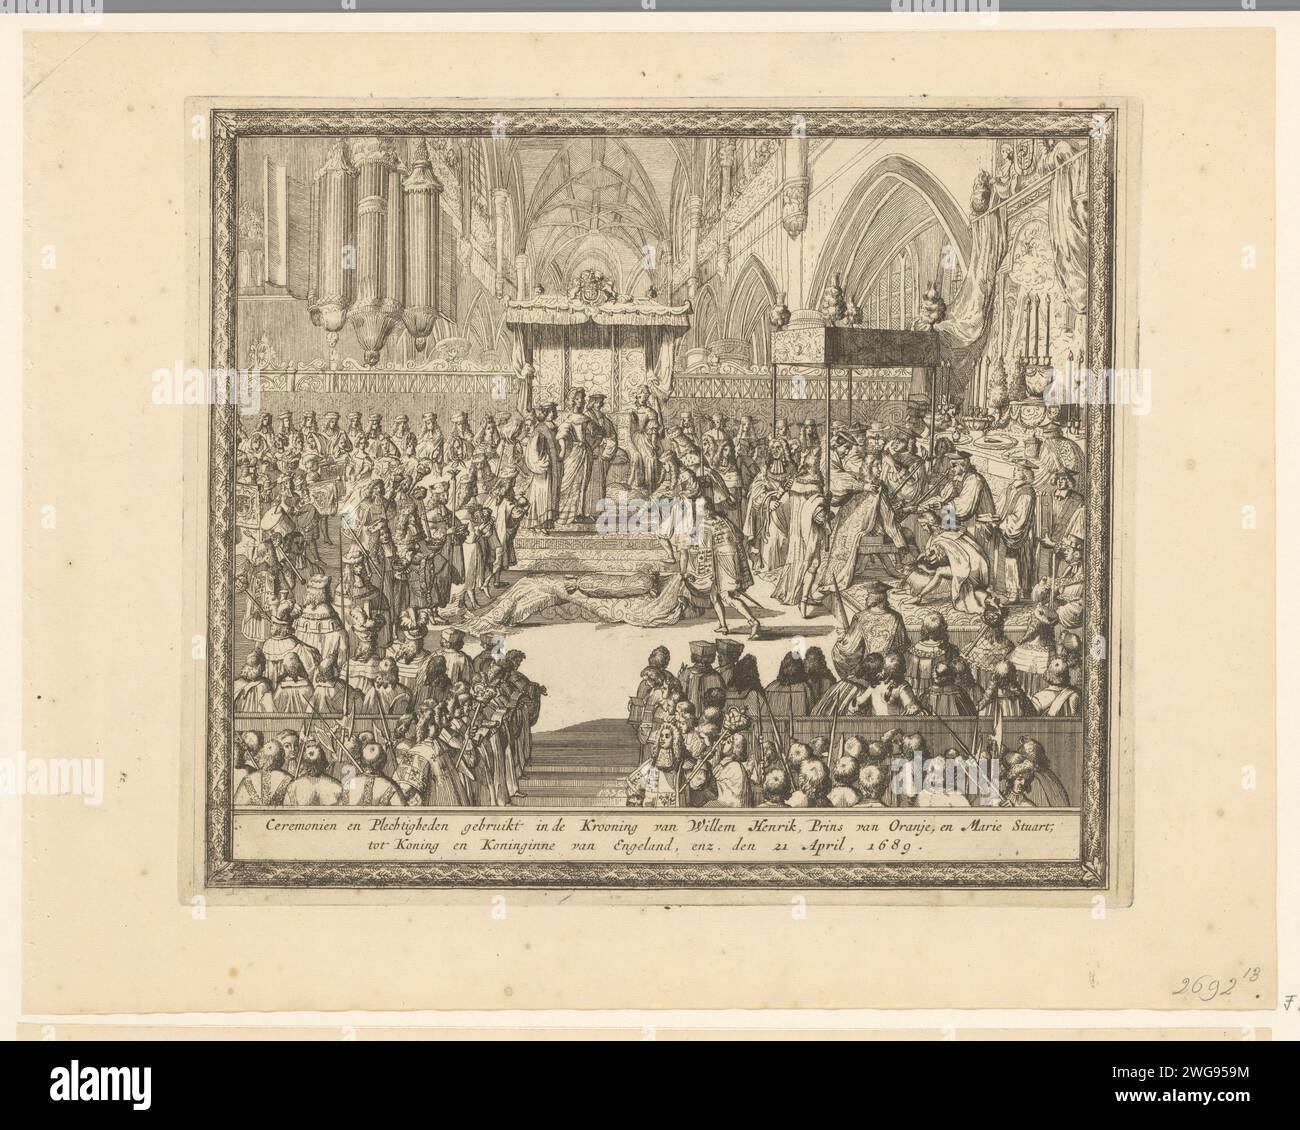 The coronation of Willem and Mary as King and Queen of England, 1689, 1691 print The coronation of William III and Mary as King and Queen of England in Westminster Abbey, April 21, 1689. Plate 13 in a series of 20 records about the Glorious Revolution in England in the years 1688-1691. Northern Netherlands paper etching during the coronation Westminster Abbey Stock Photo